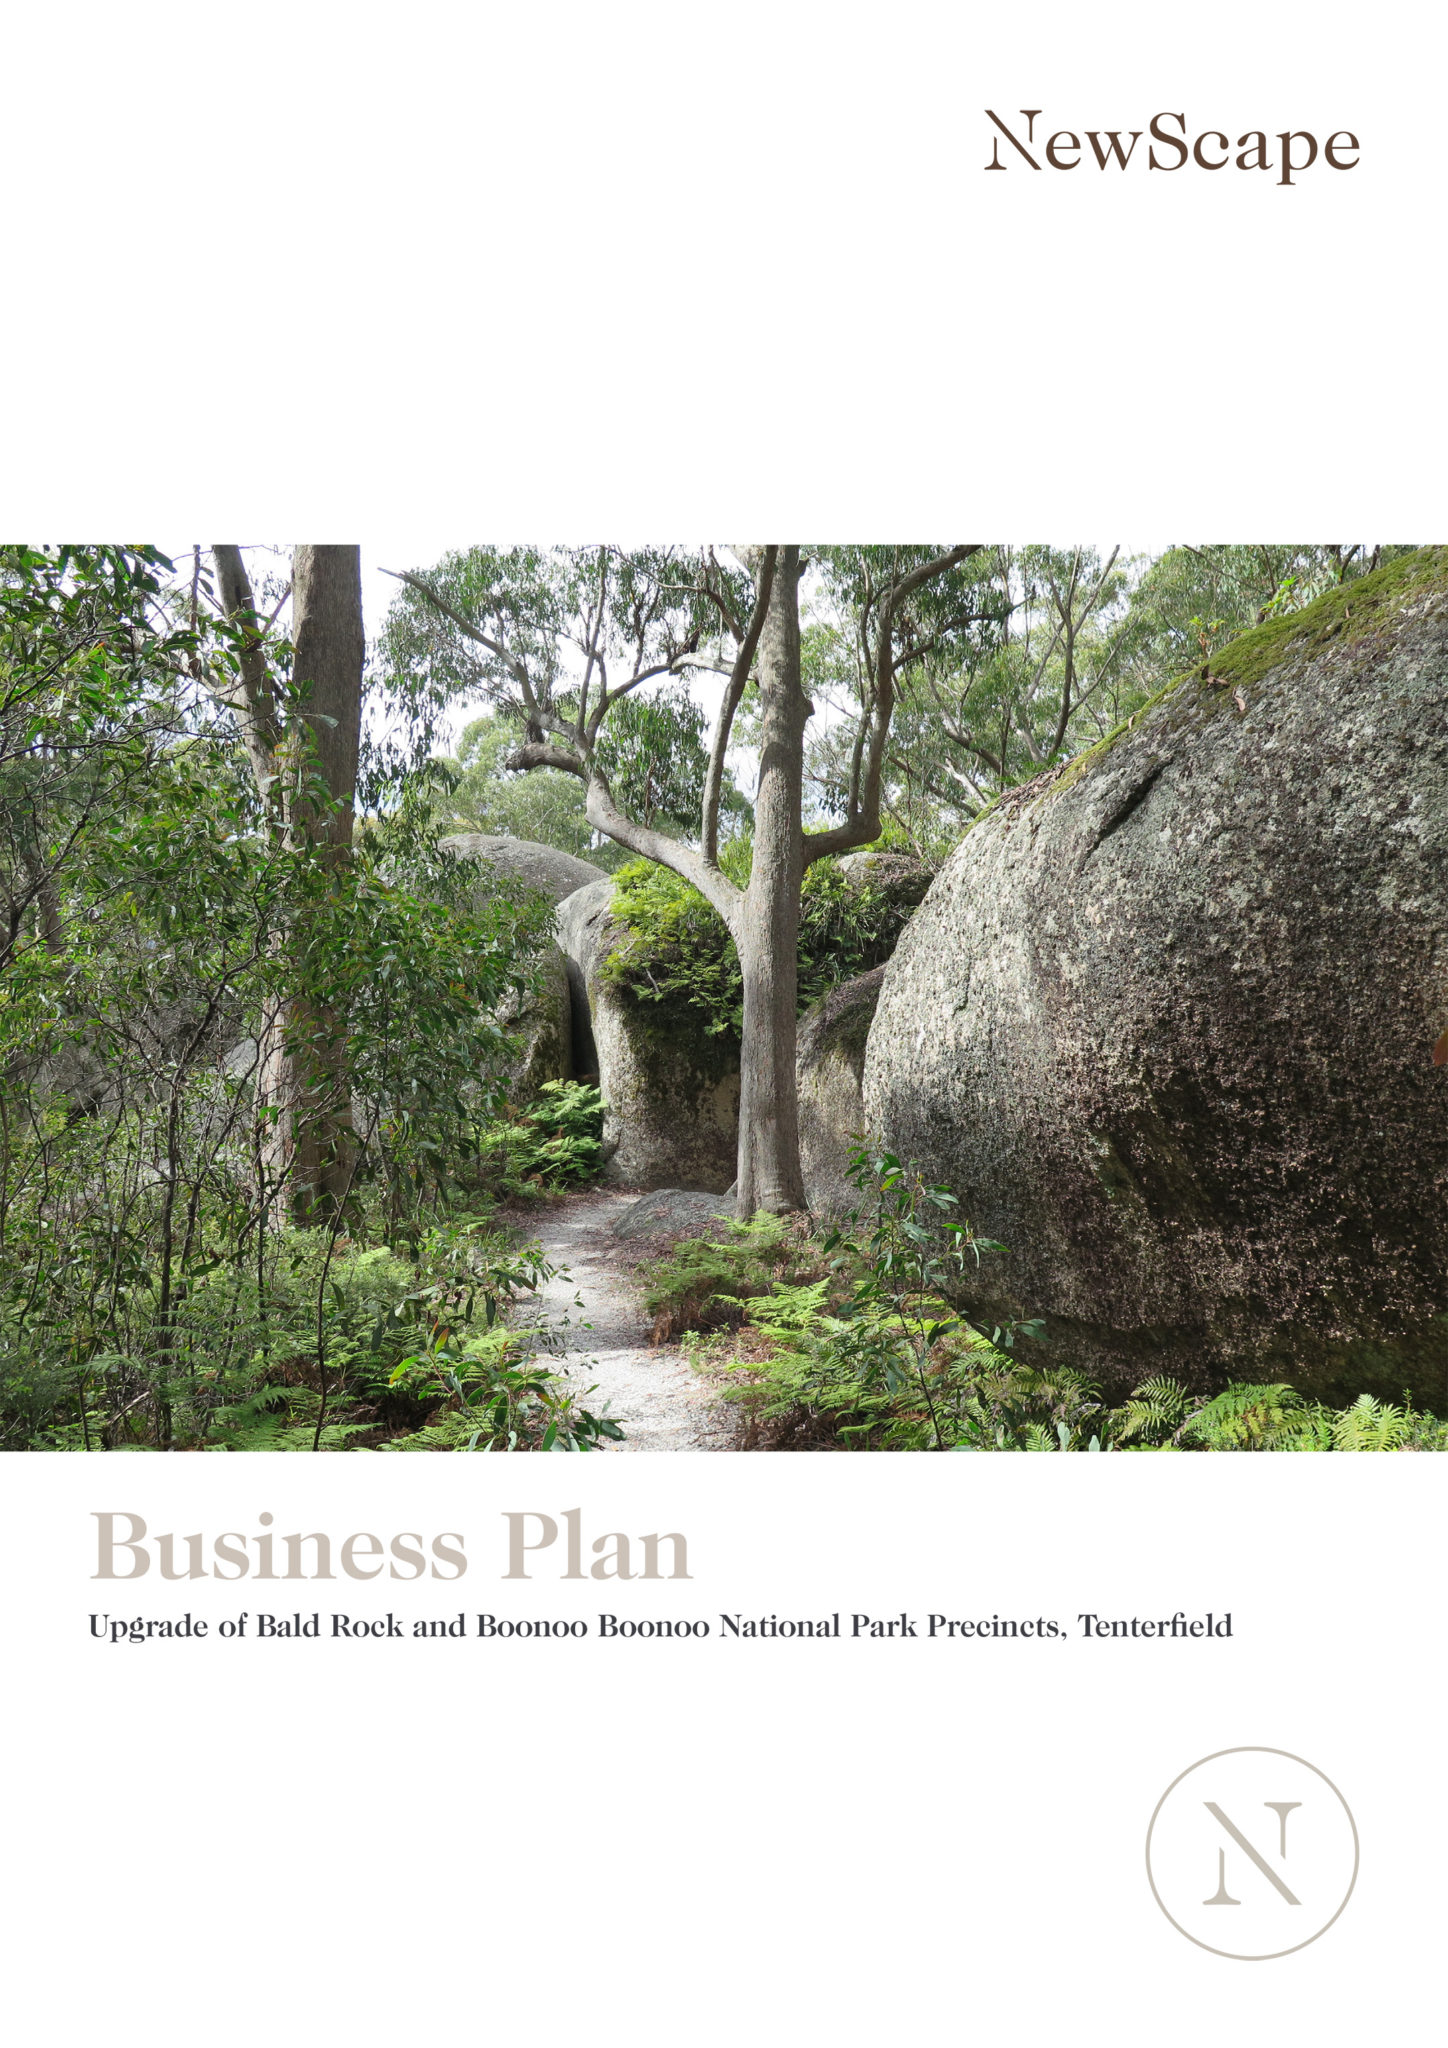 Tenterfield Business Plan high res-1 copy